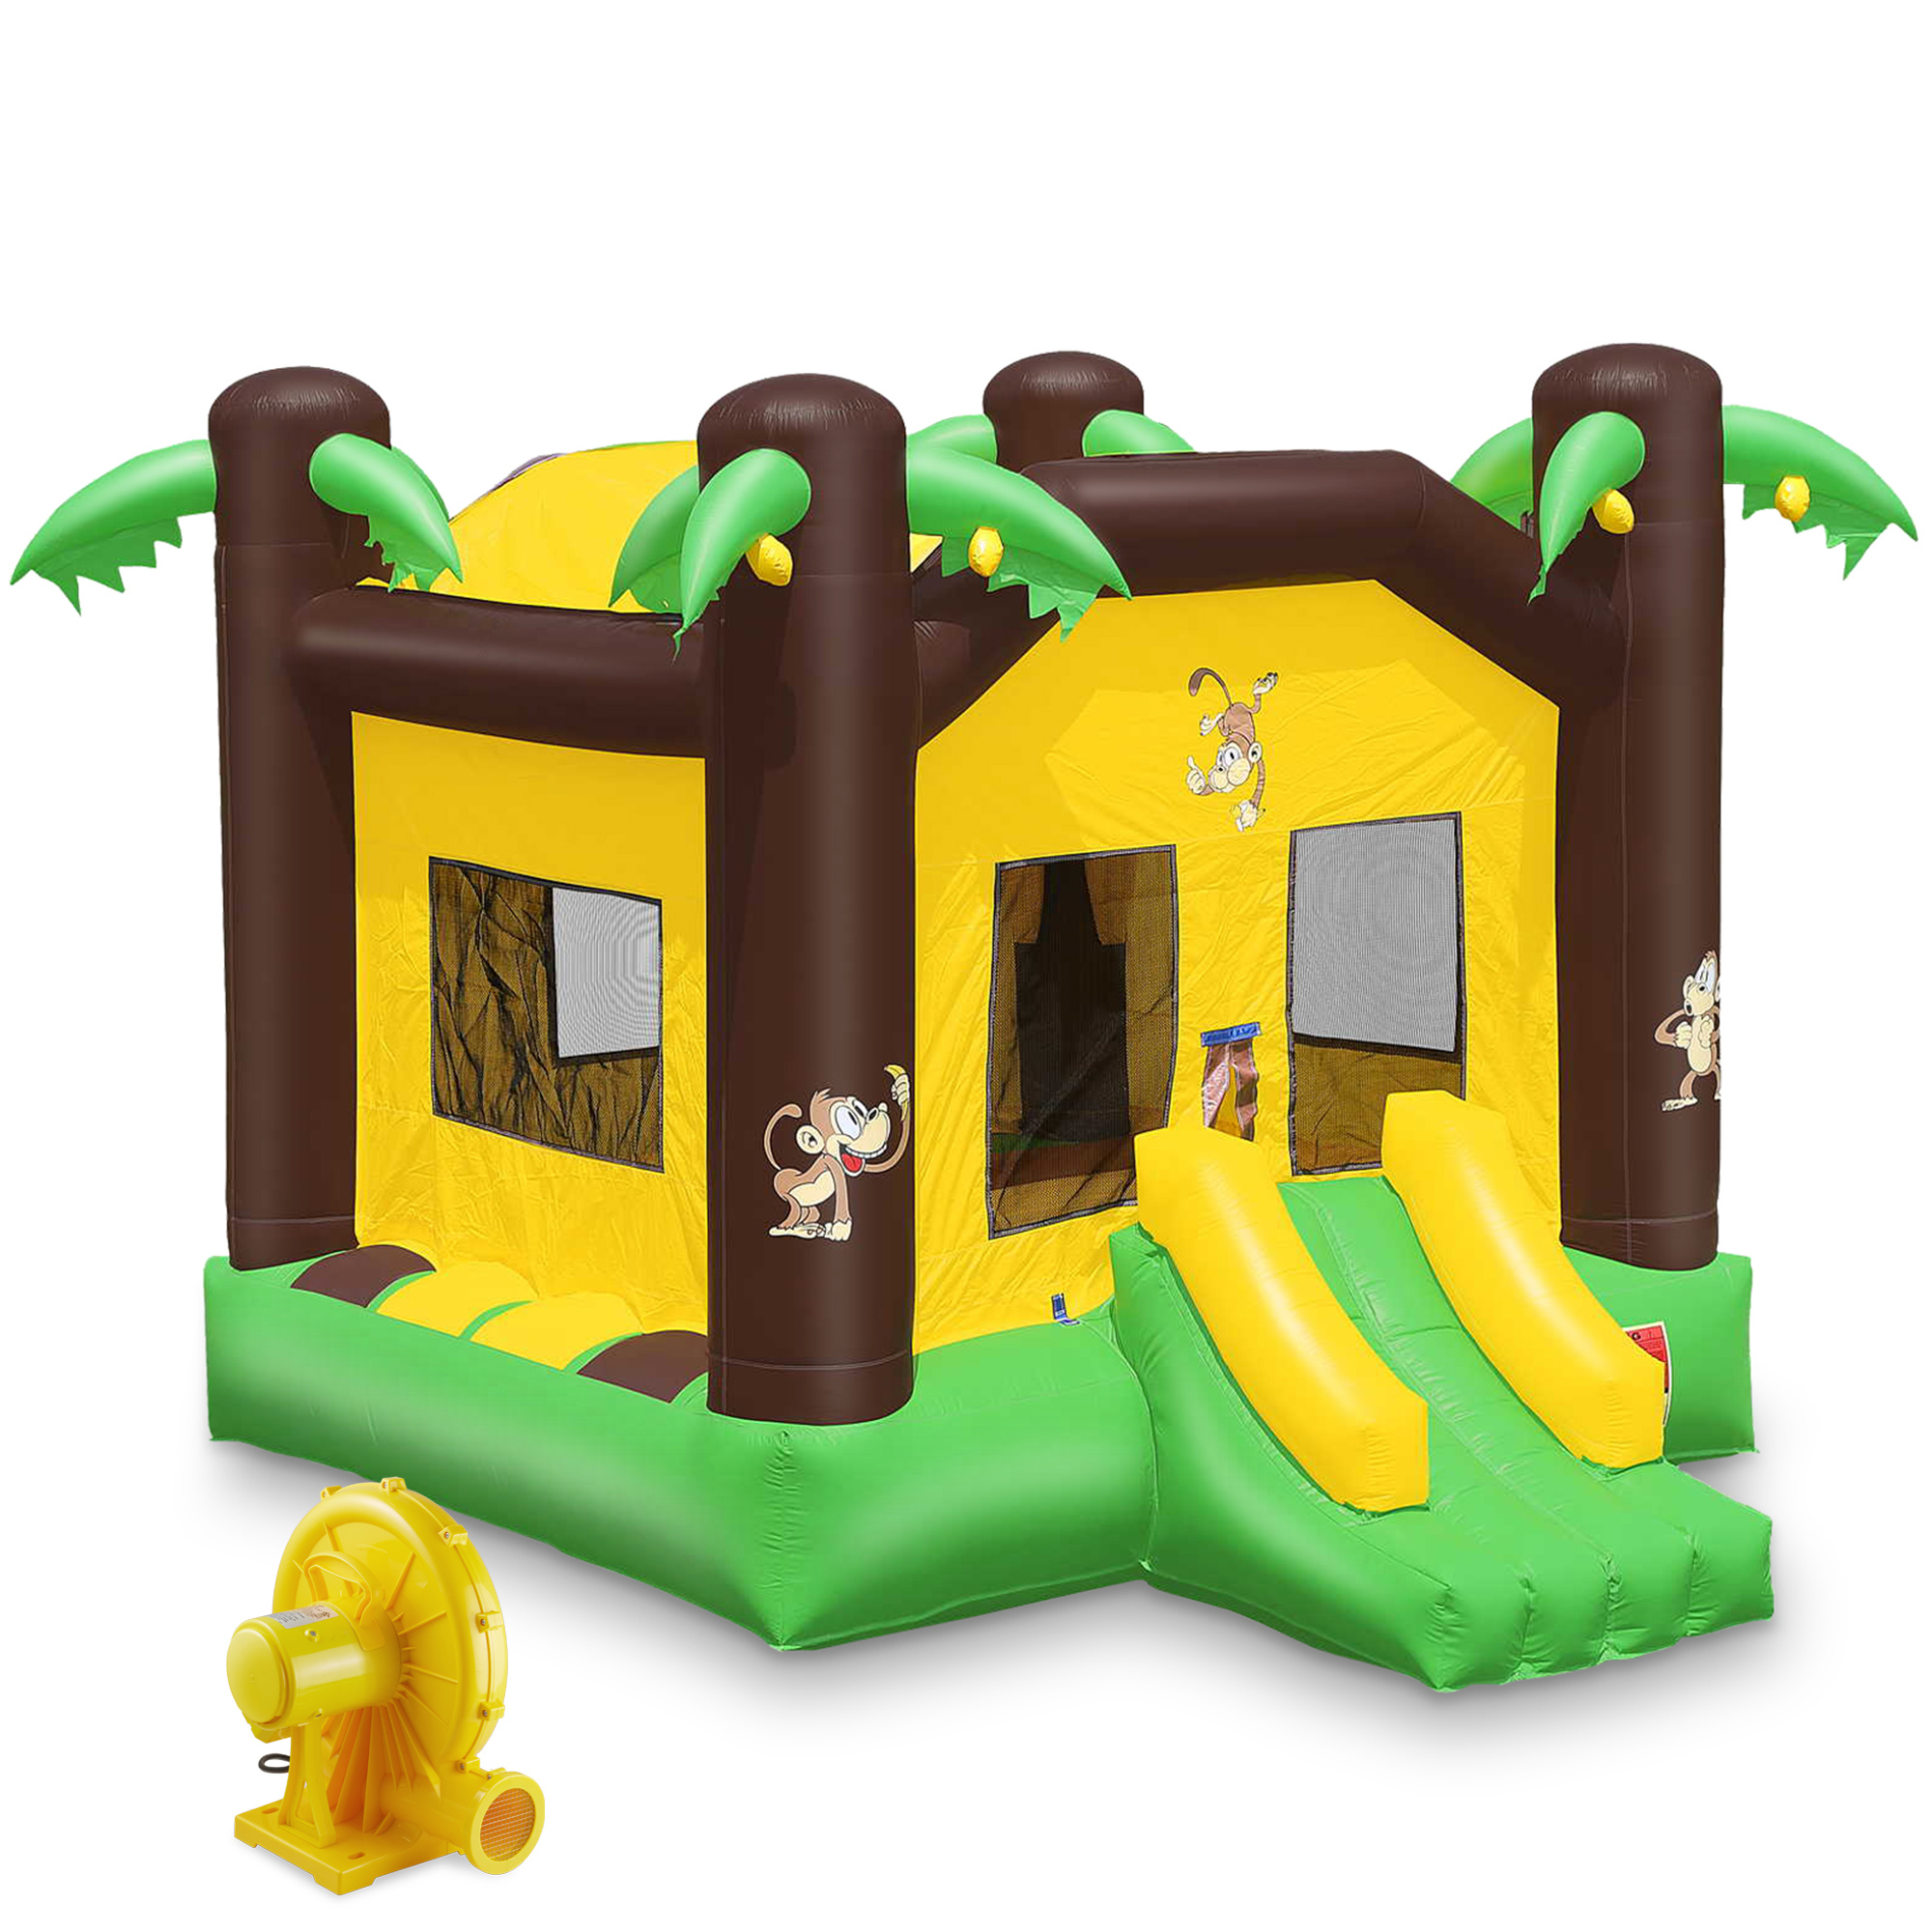 Cloud 9 Jungle Bounce House & Blower - Commercial Grade Inflatable Bouncer - image 1 of 7